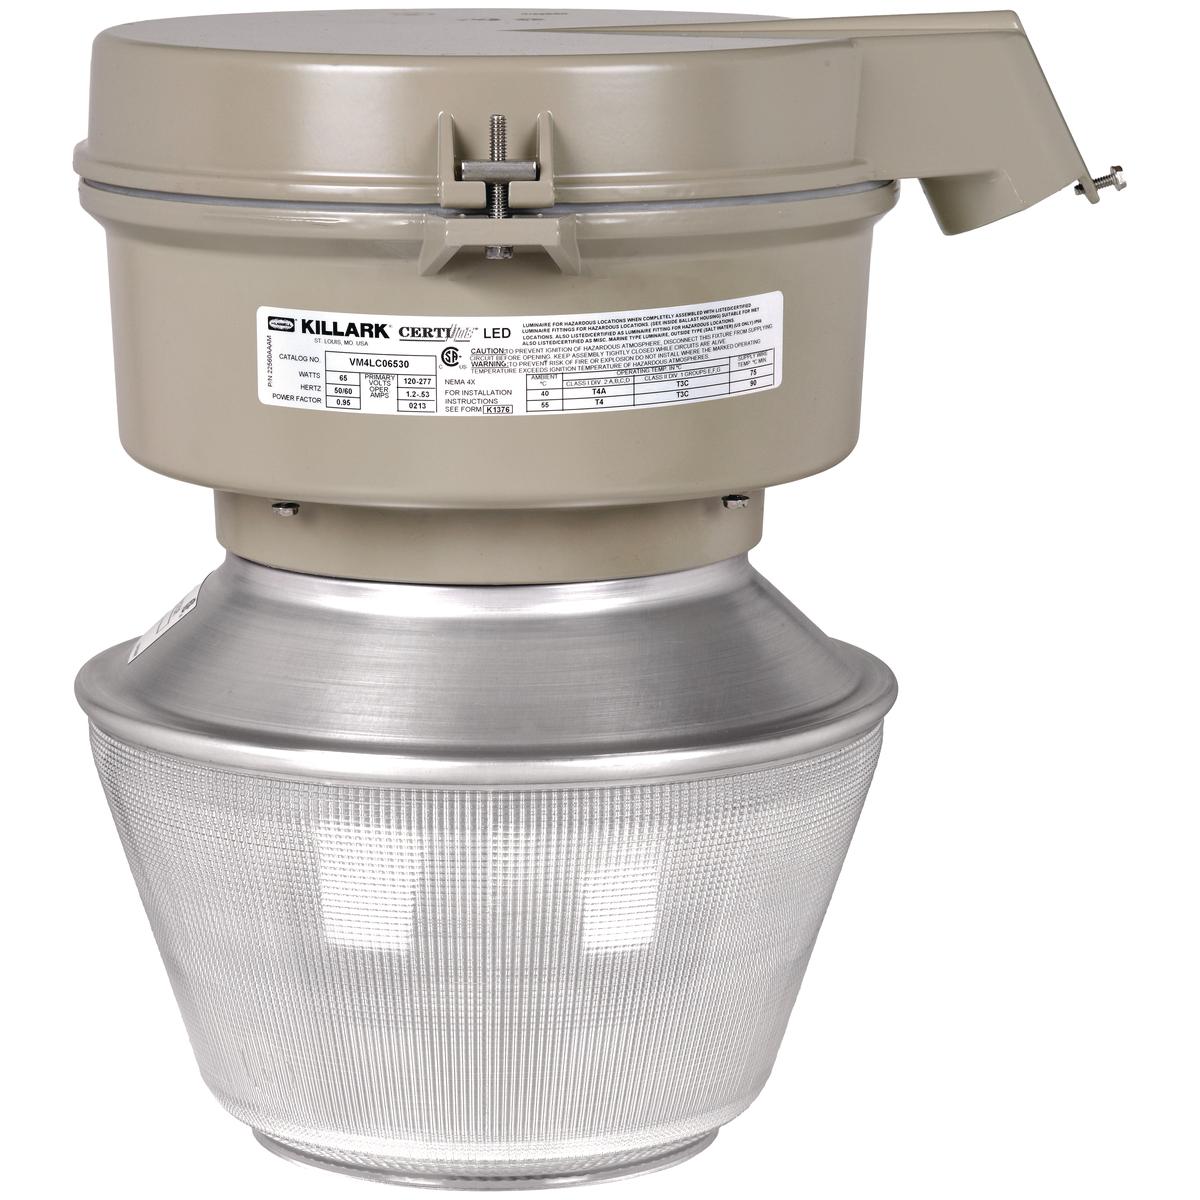 Hubbell VE4Q6432E30D5S5G VE4 64W Normal/32W Emergency, 120-277V, 1-1/2" Stanchion Mount, Type V 8" Spin Top Refractor with Guard  ; Quad-Pin triple-tube long-life compact fluorescent lamps included ; World Voltage 120-277VAC 50-60 Hz ; LED charging indicator light visible through